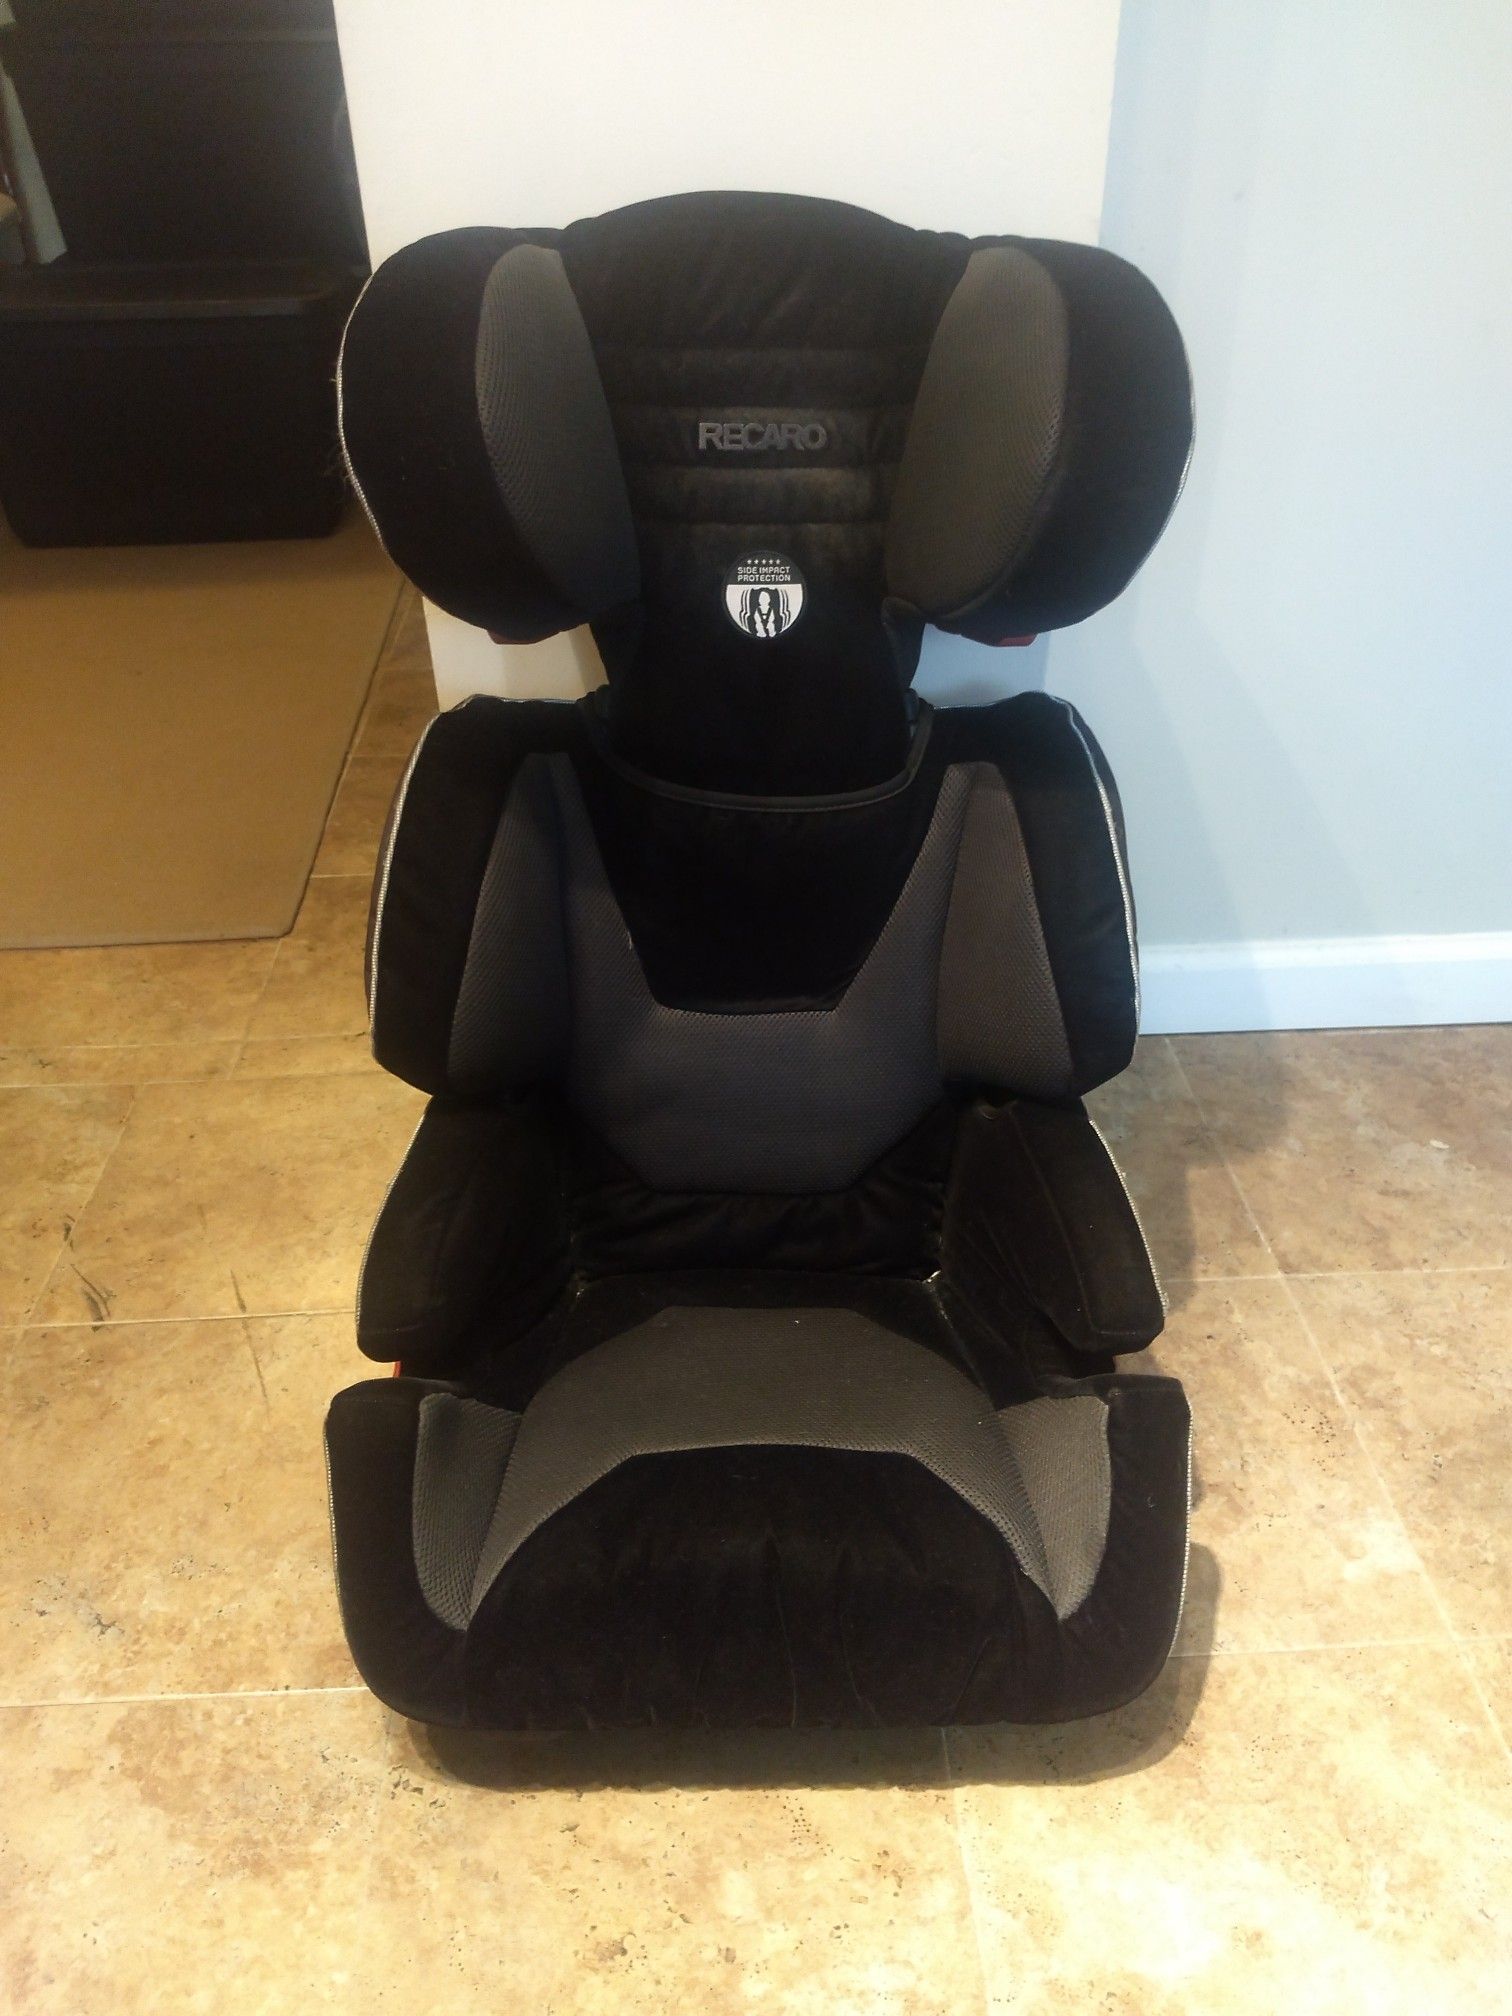 Gently pre-owned Recaro booster seat